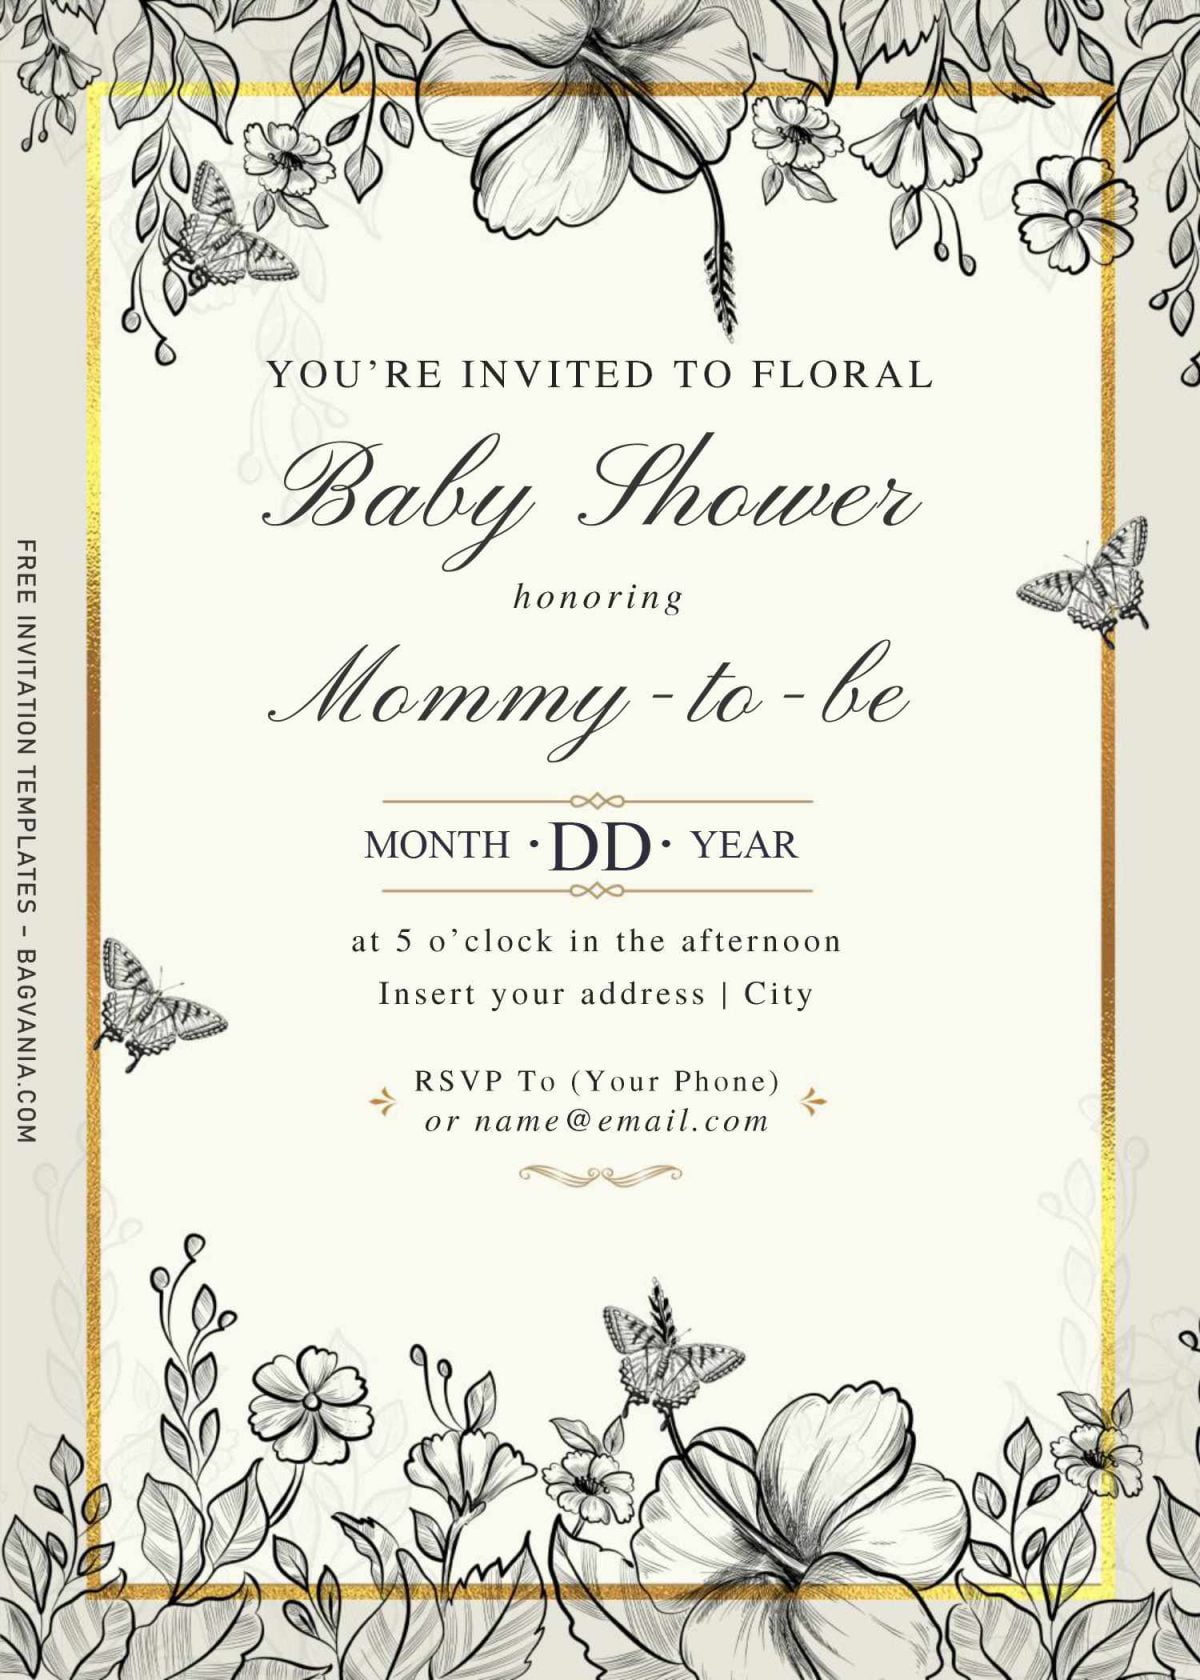 Free Hand Drawn Vintage Floral Wedding Invitation Templates For Word and has classy vintage script font styles or typography